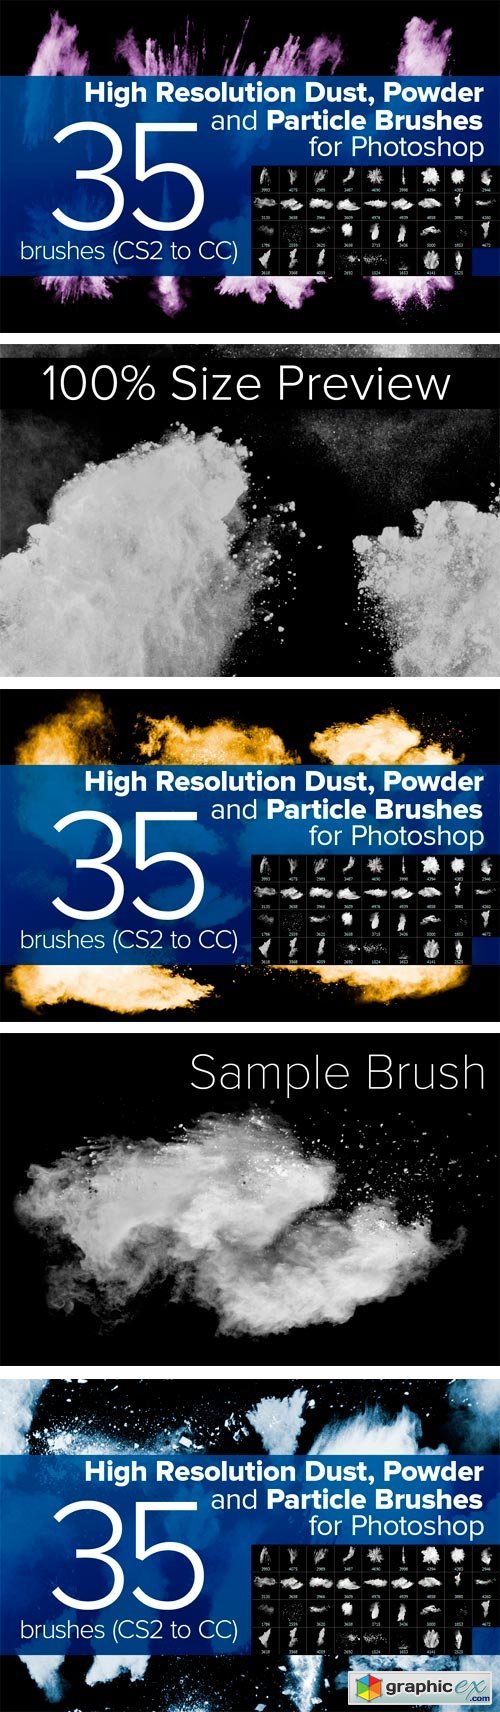 Dust, Powder and Particle Brushes